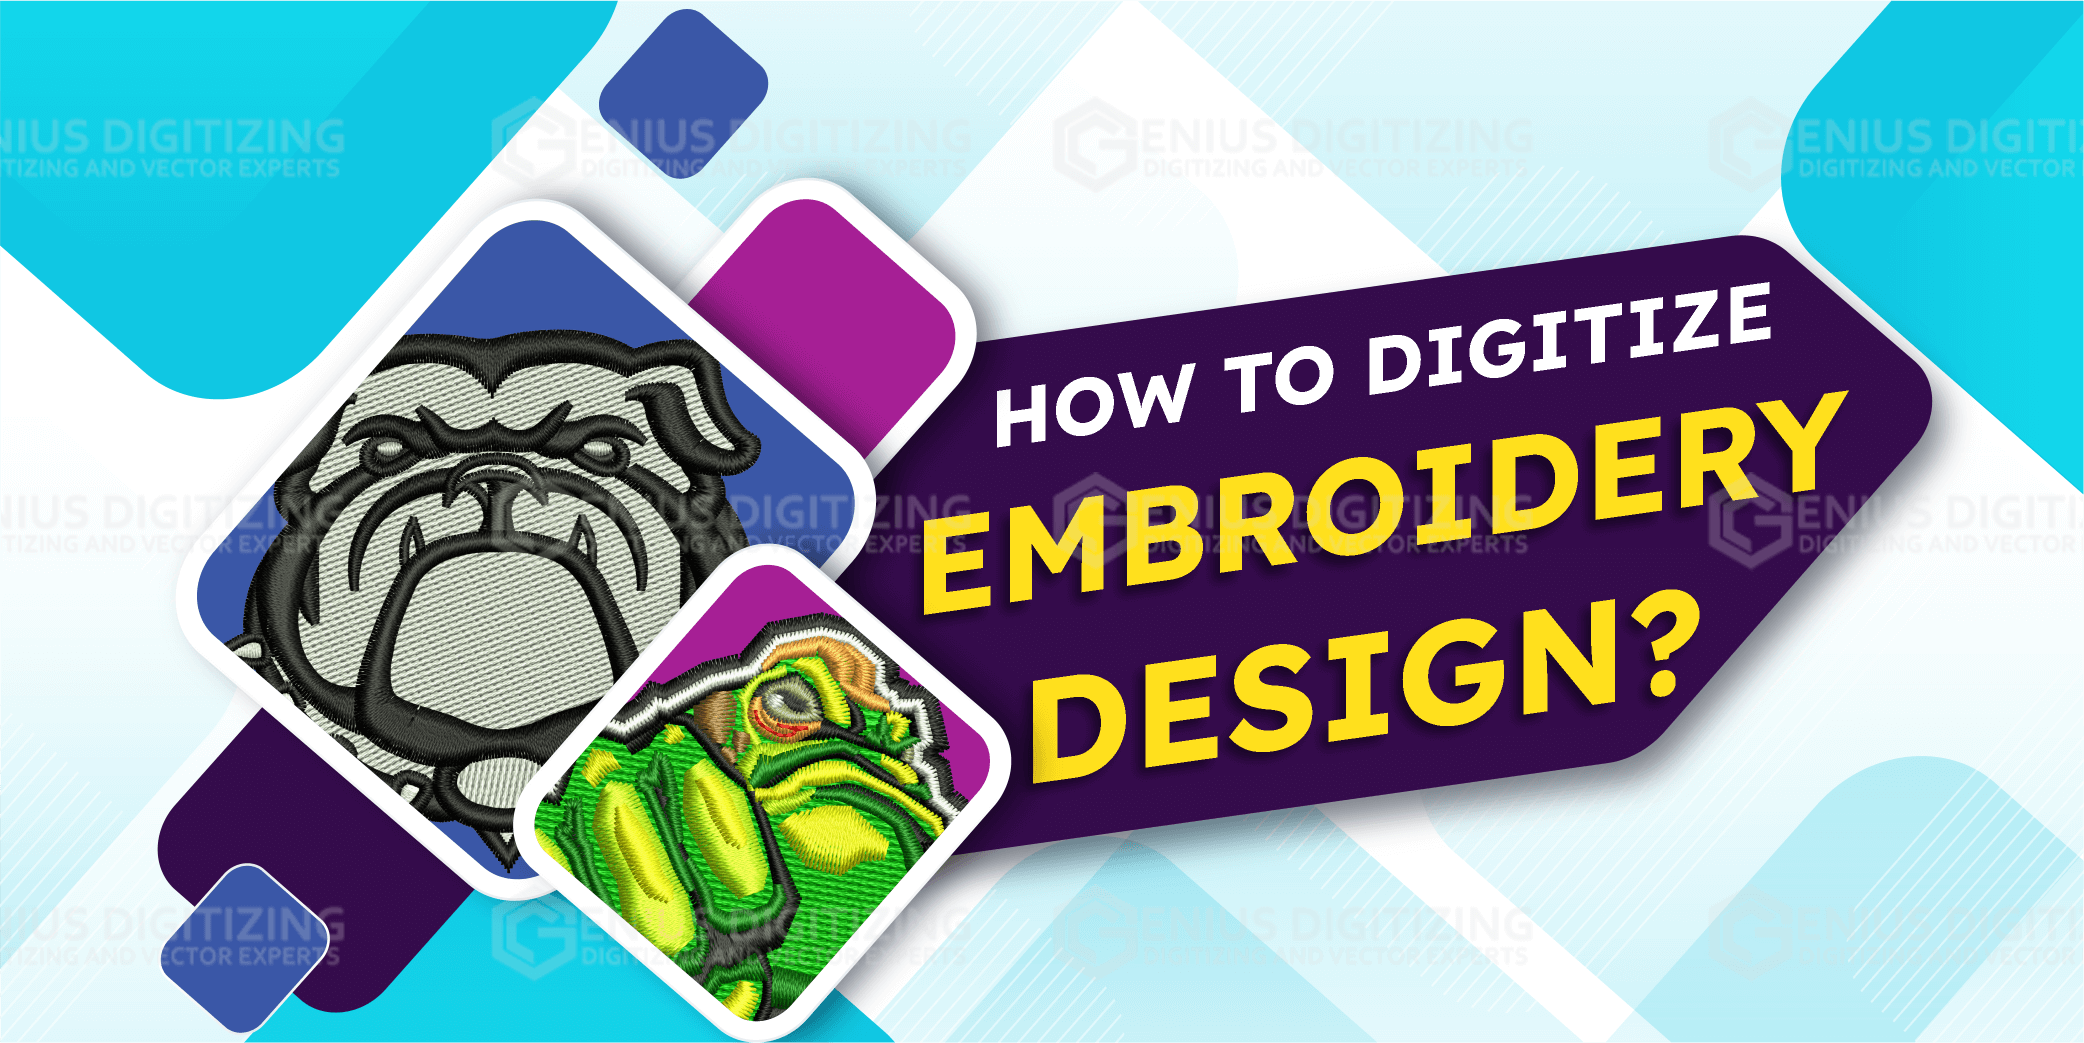 How to digitize embroidery designs?
